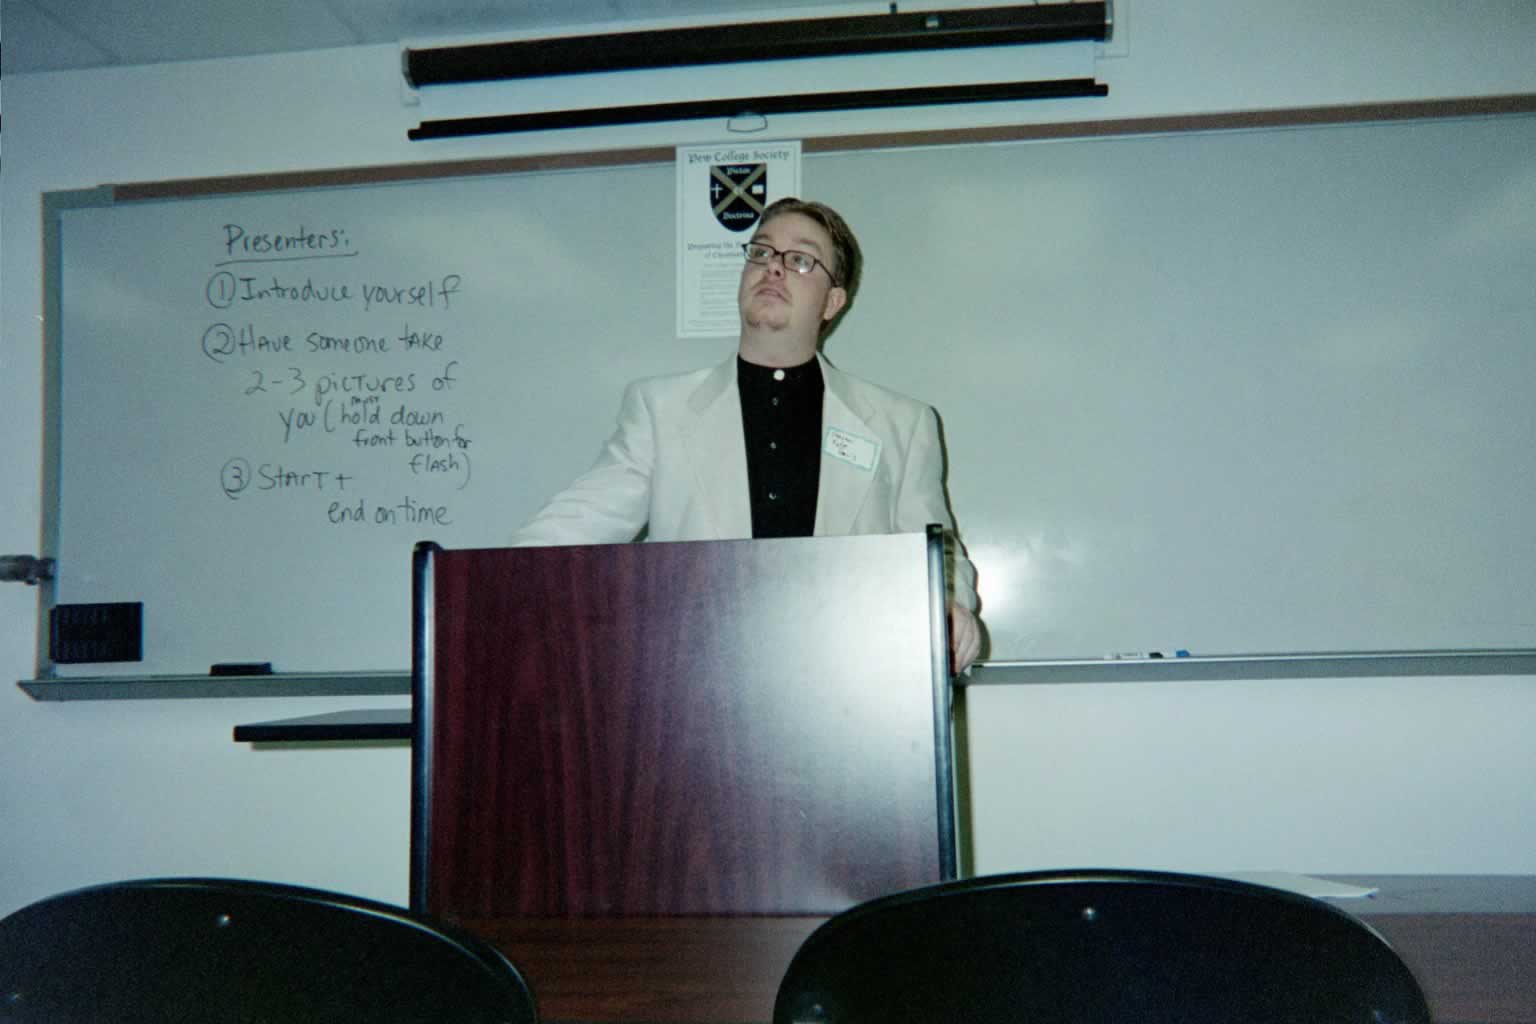 picture of a man standing behind a podium